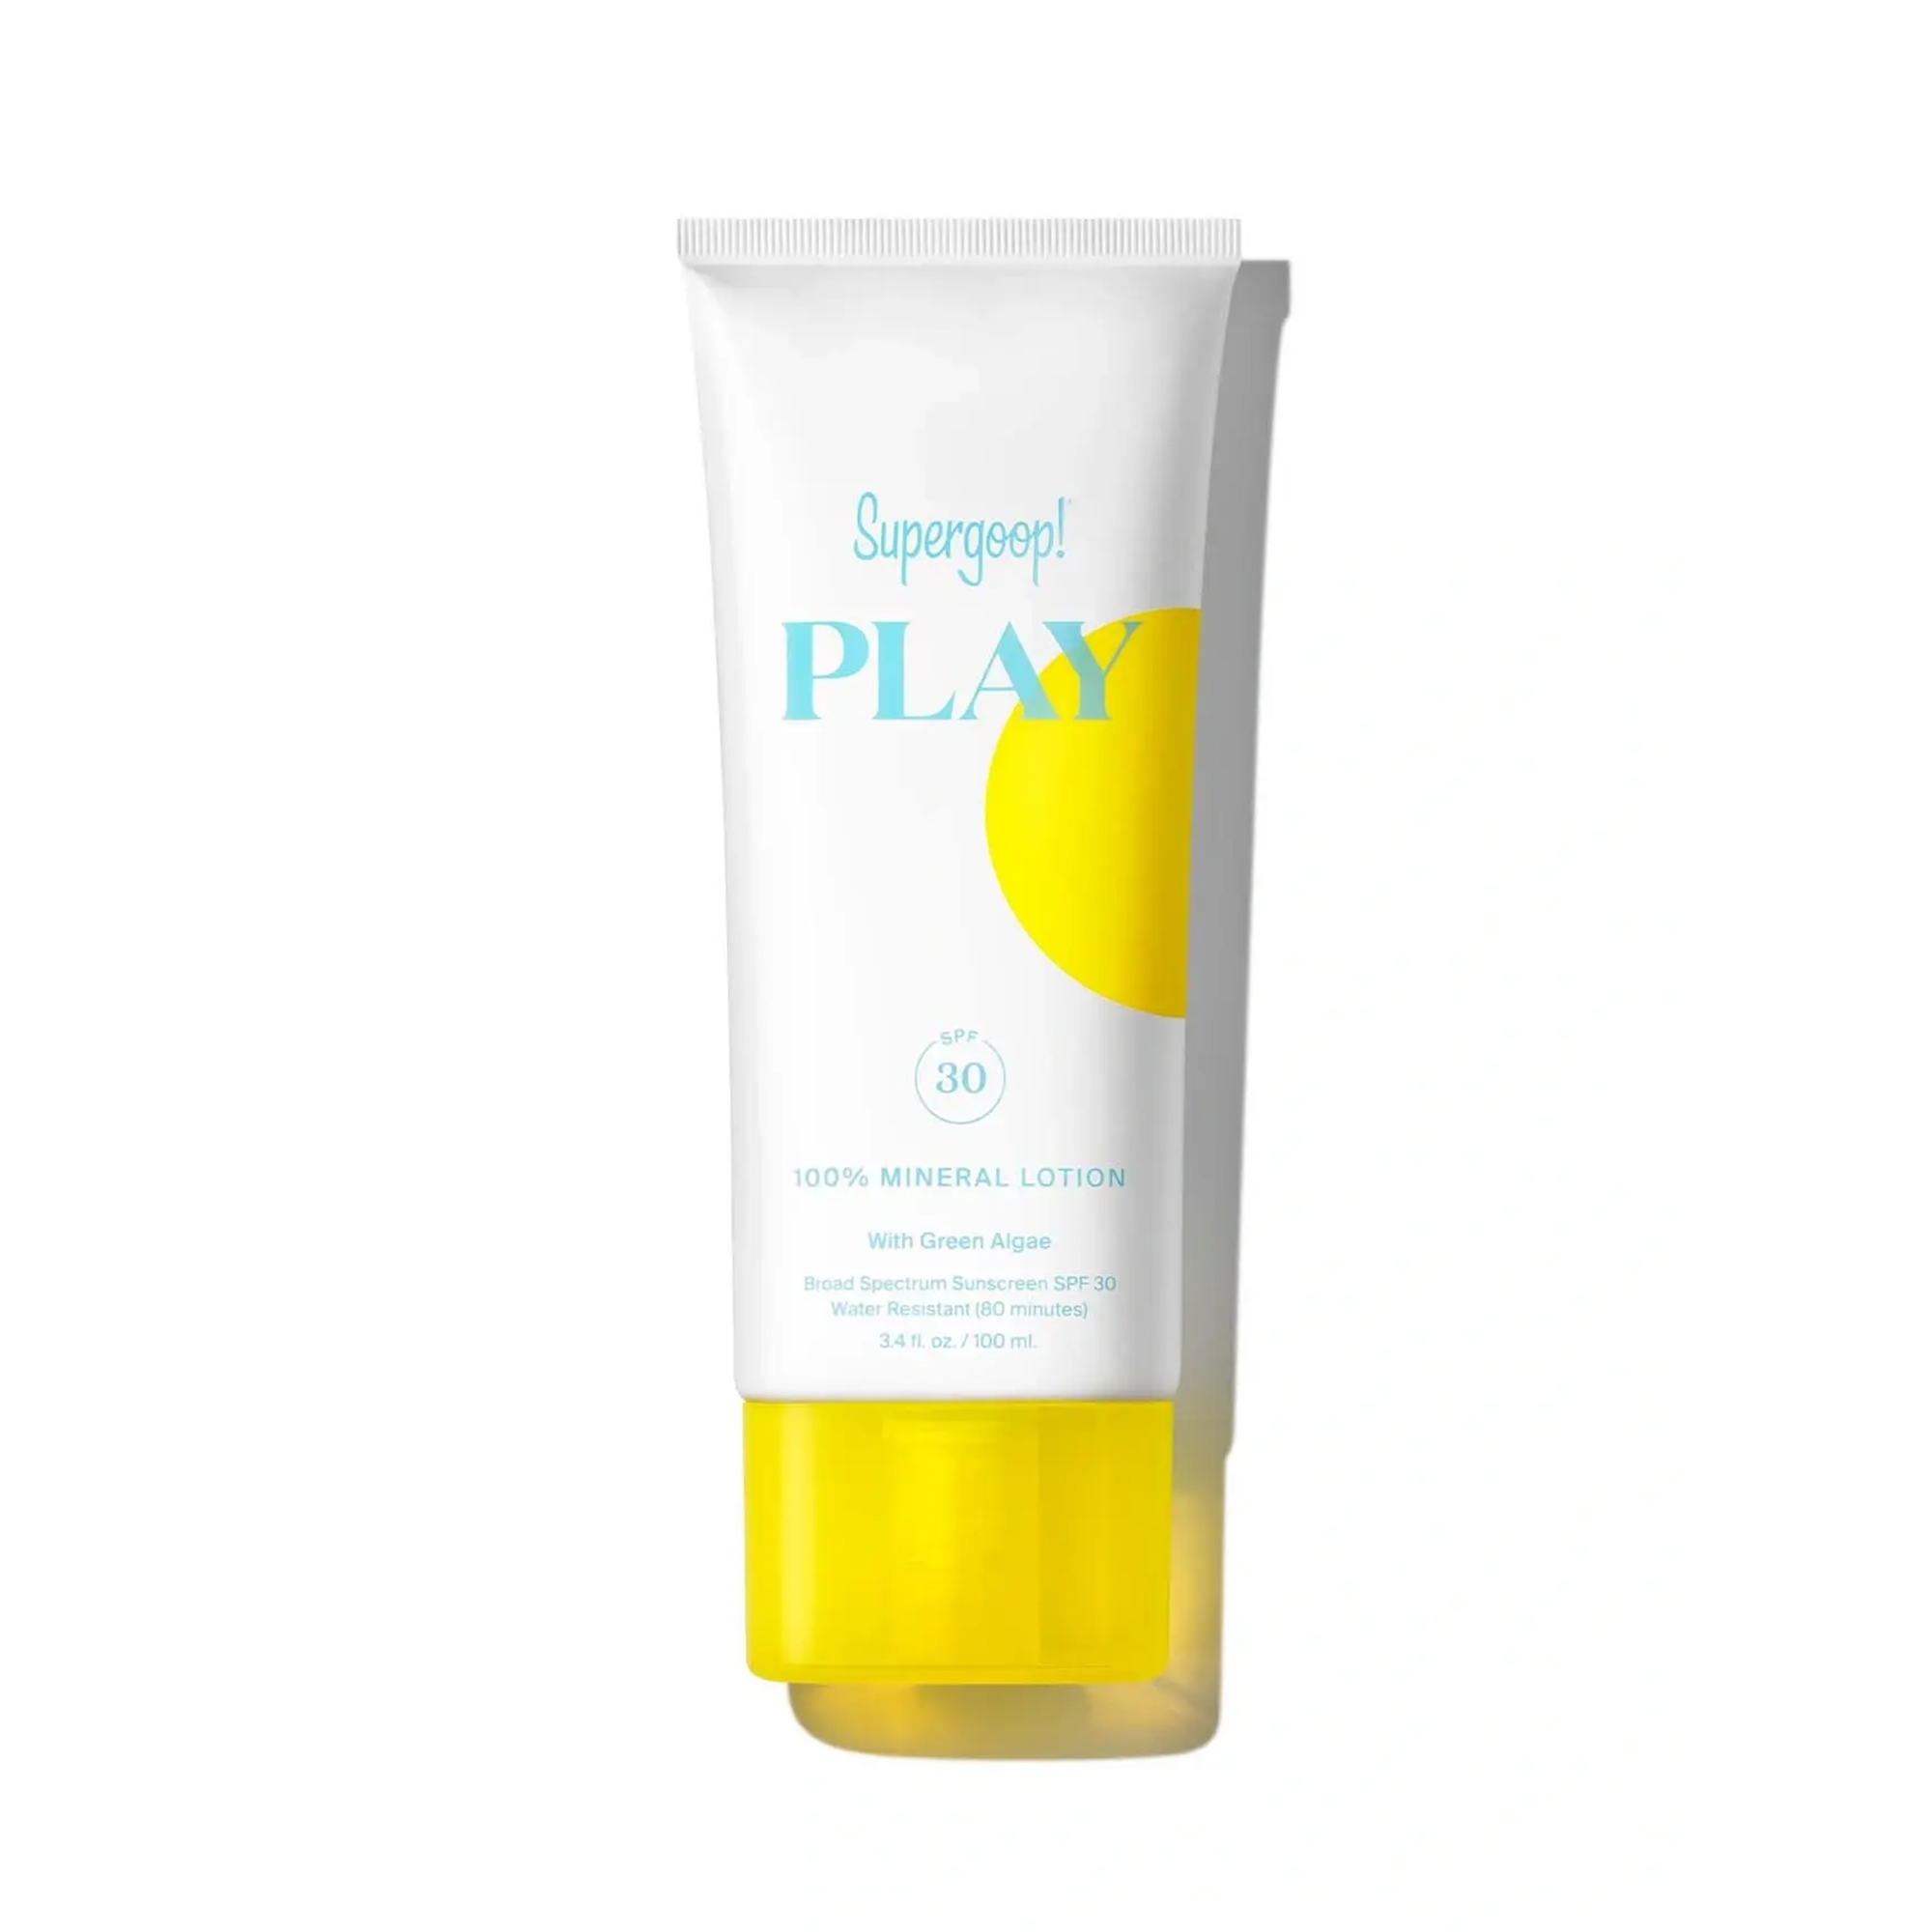 Supergoop! Play 100% Mineral Lotion SPF 30 with Green Algae / 3.4OZ